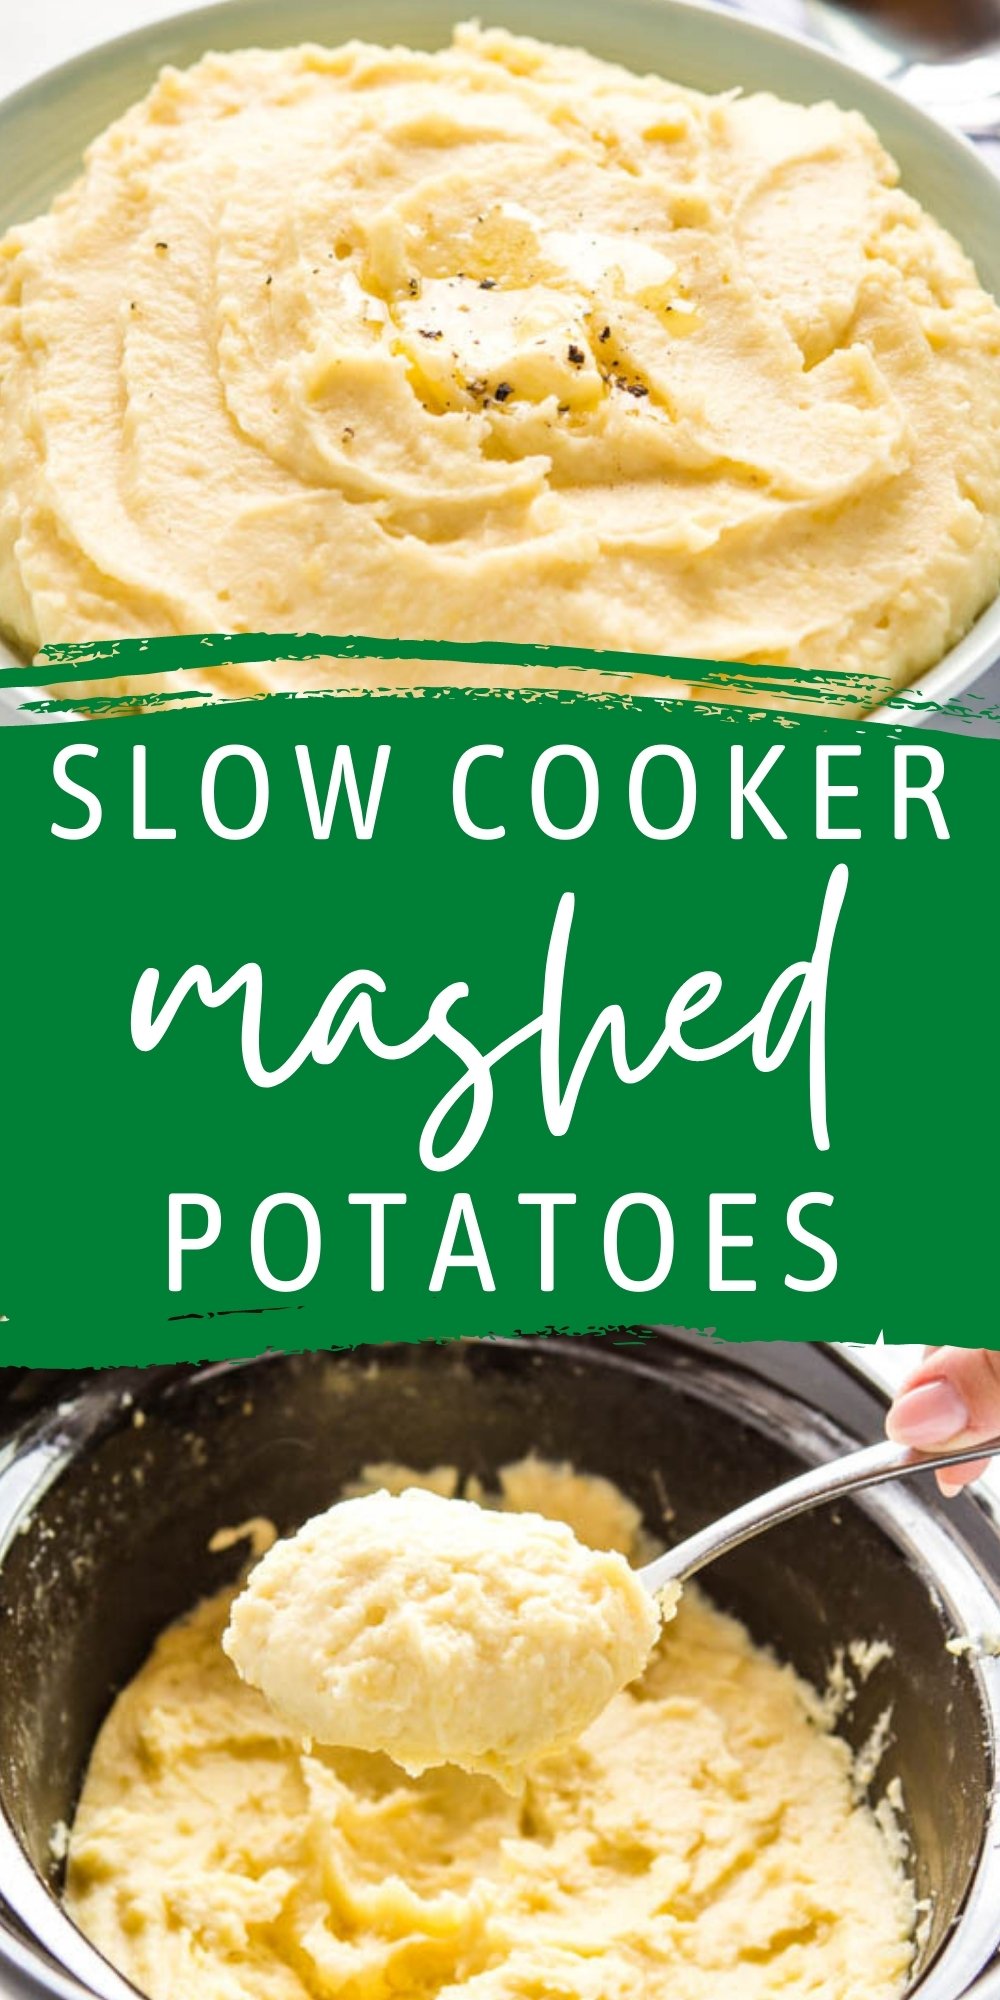 These Slow Cooker Mashed Potatoes are the perfect easy holiday side dish! Basic ingredients, perfect for a crowd, and extra creamy and flavourful. The BEST set-it-and-forget-it side dish recipe! Recipe from thebusybaker.ca! #christmas #thanksgiving #mashedpotatoes #sidedish #slowcooker #crockpotsidedish #holidaysidedish #potatoes via @busybakerblog